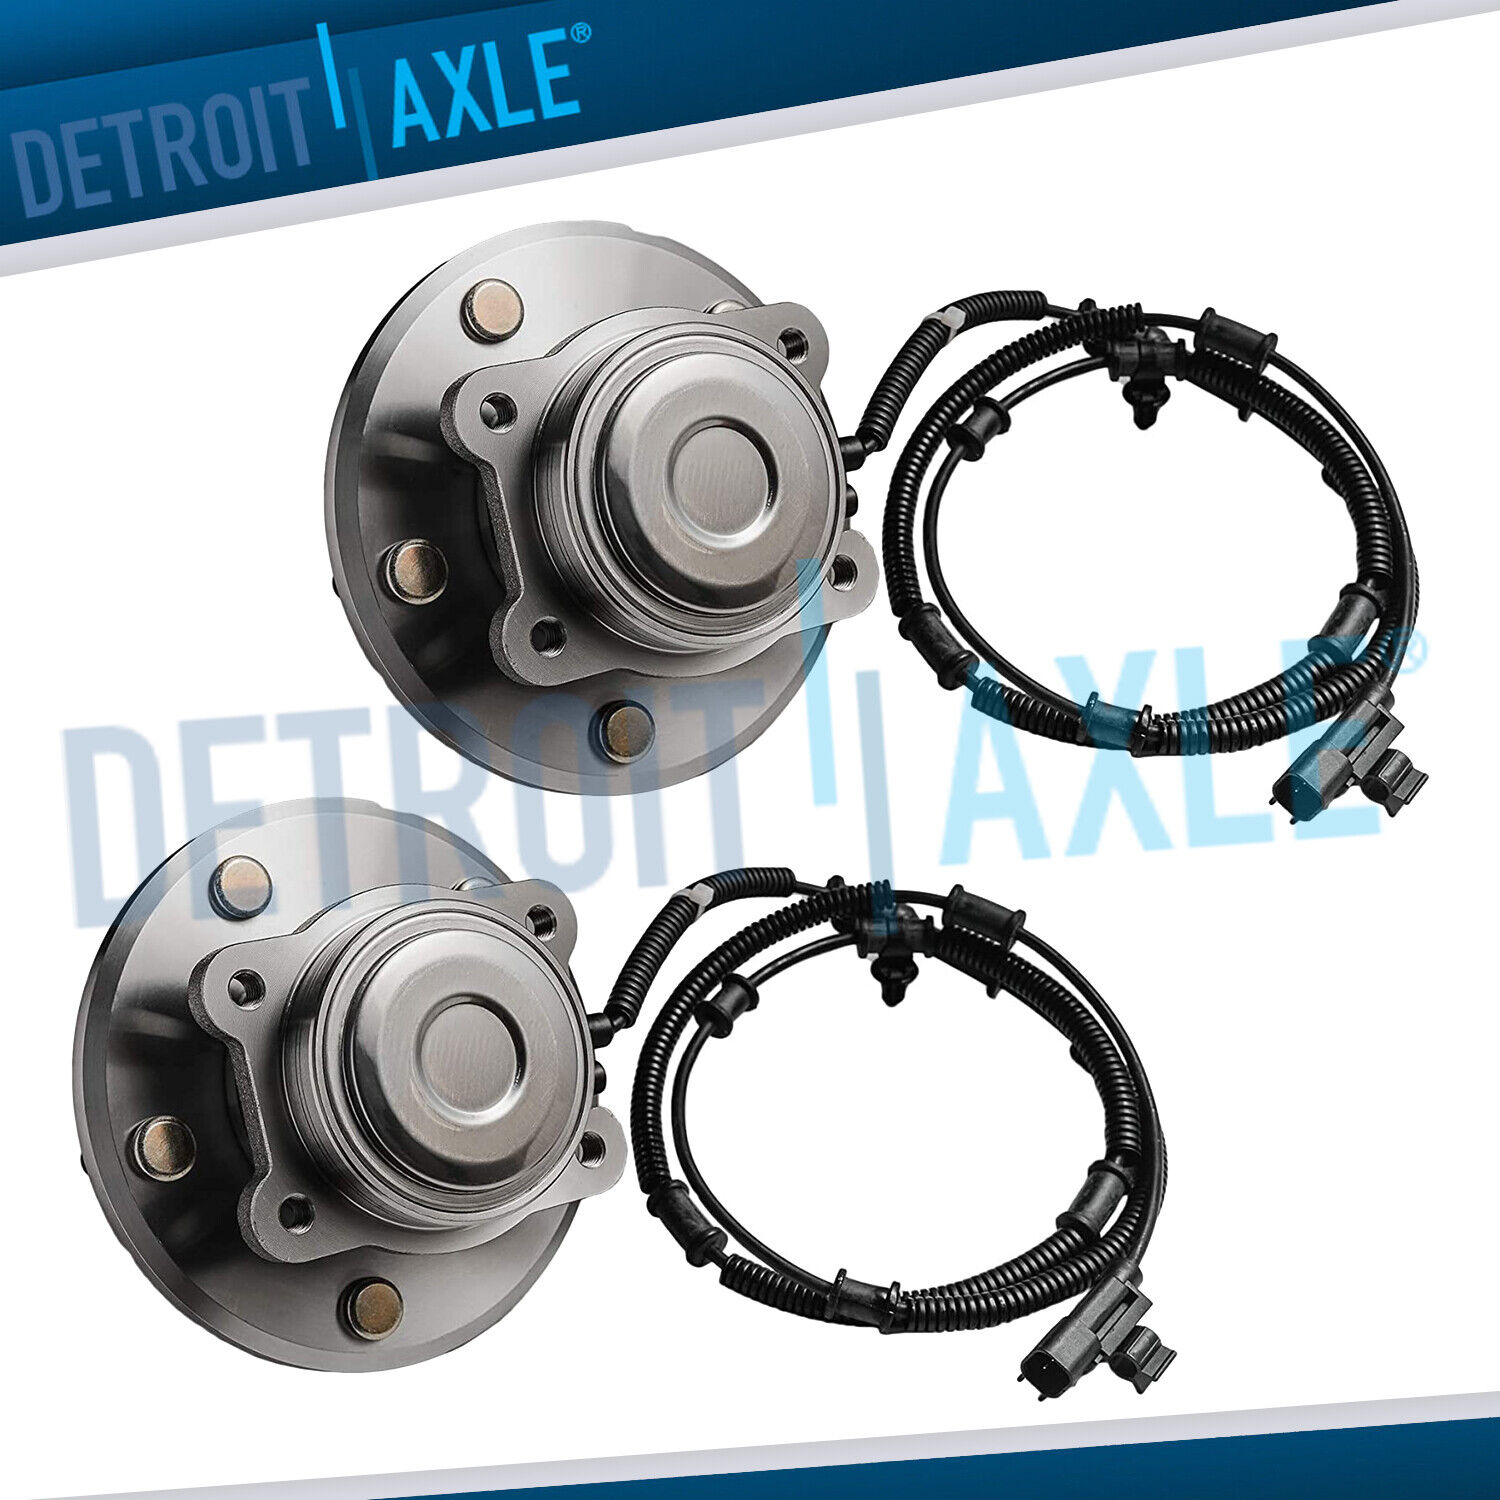 Pair (2) Rear Wheel Bearing and Hubs for 2008-2011 2012 Chrysler Town & Country